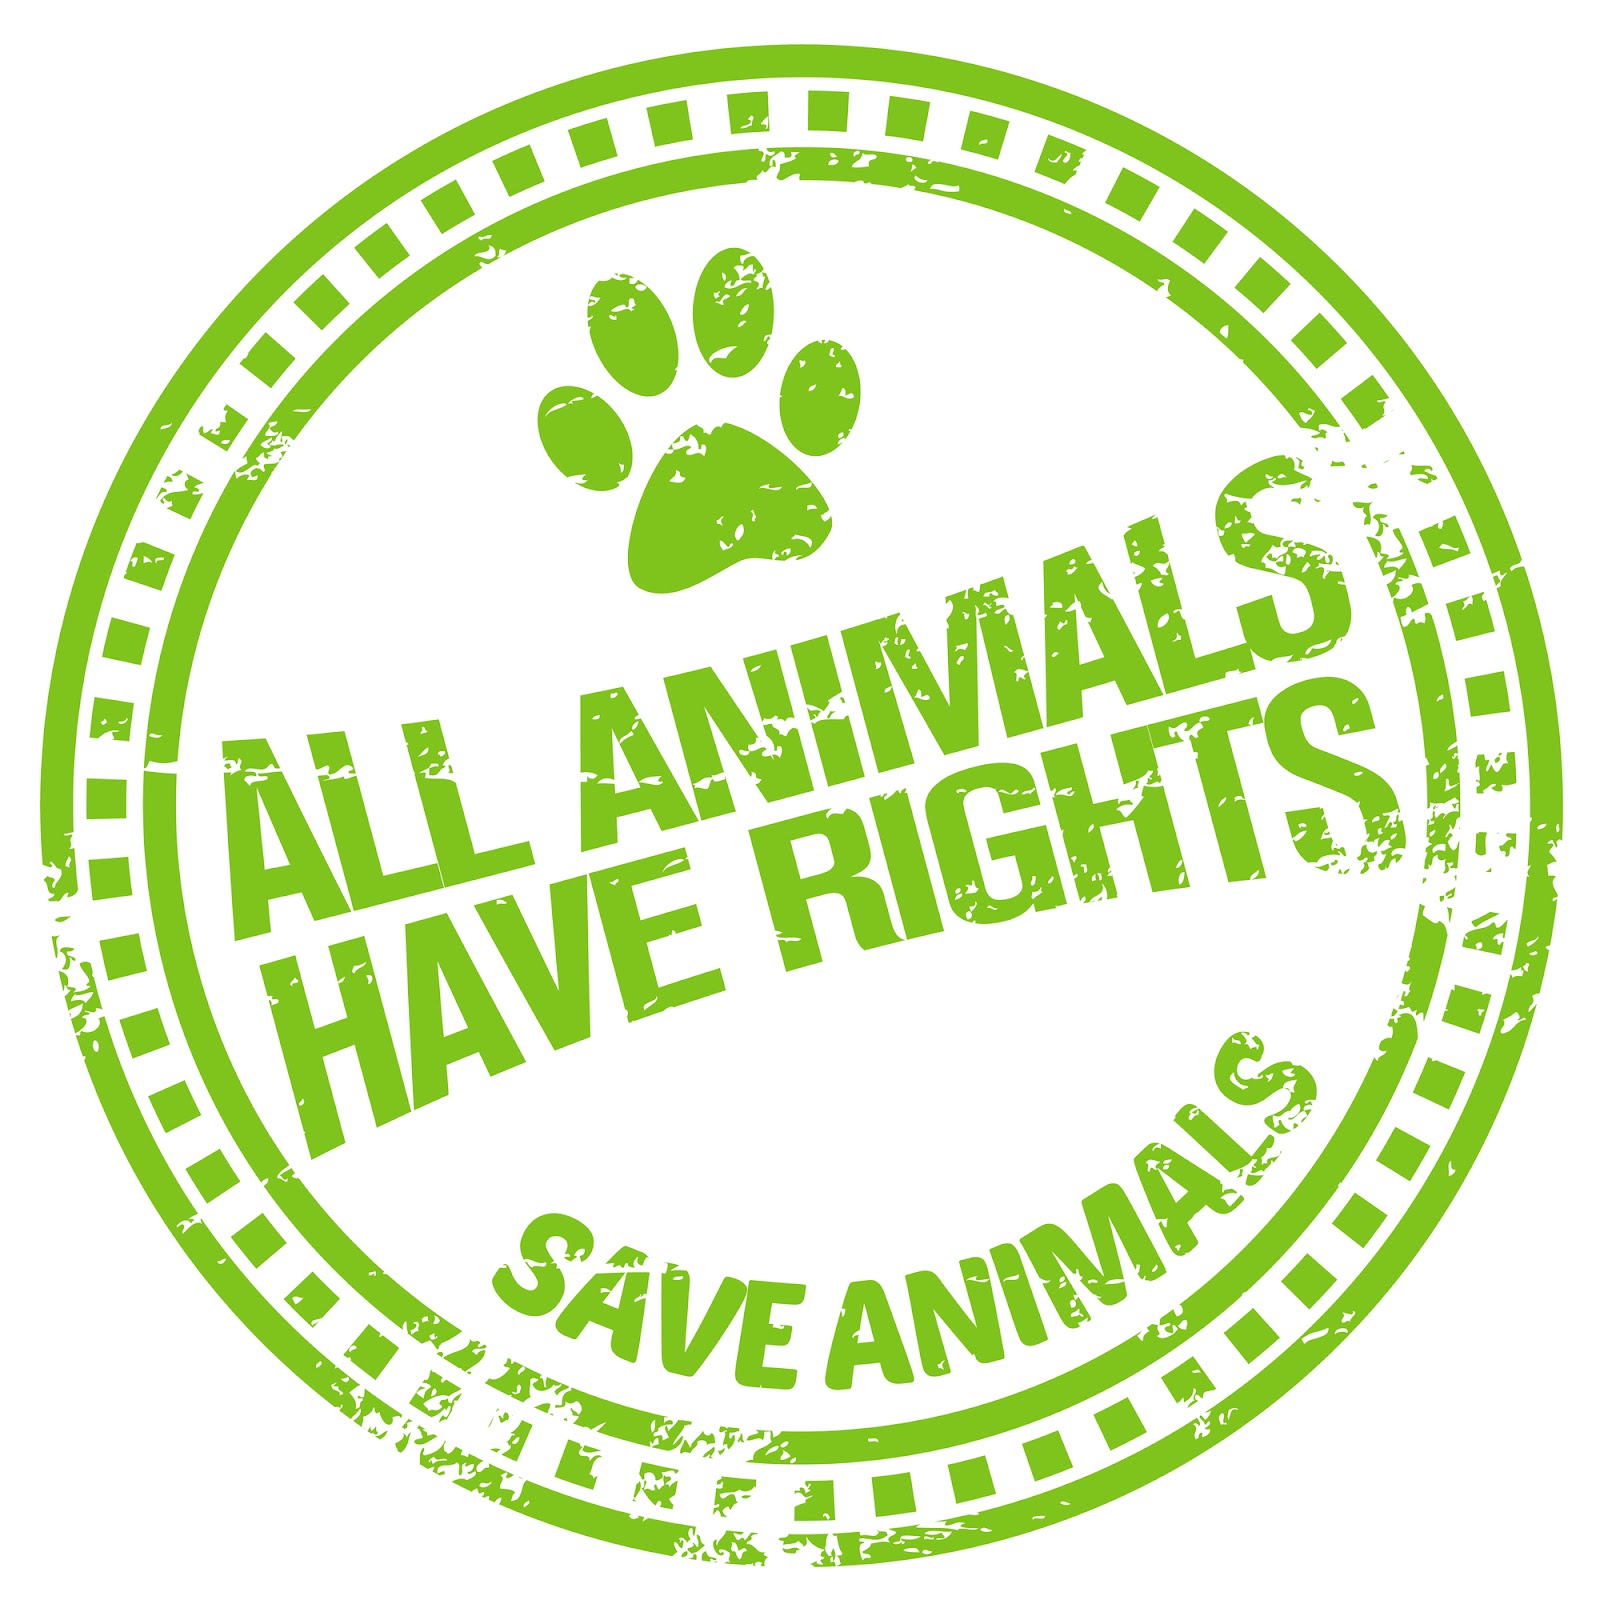 essay on animals have rights too